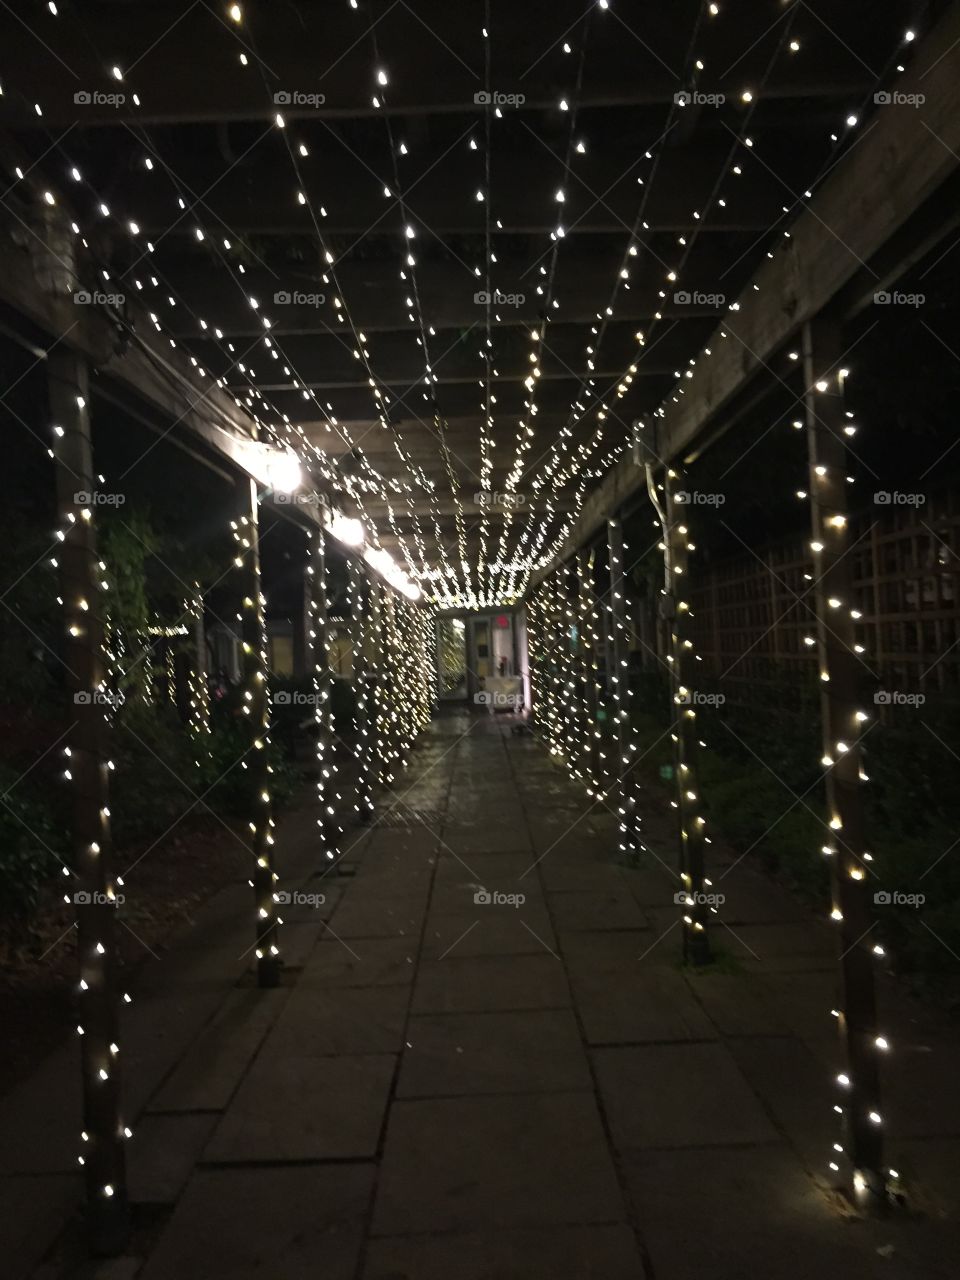 Outdoor walkway at night lit by white twinkle string lights.